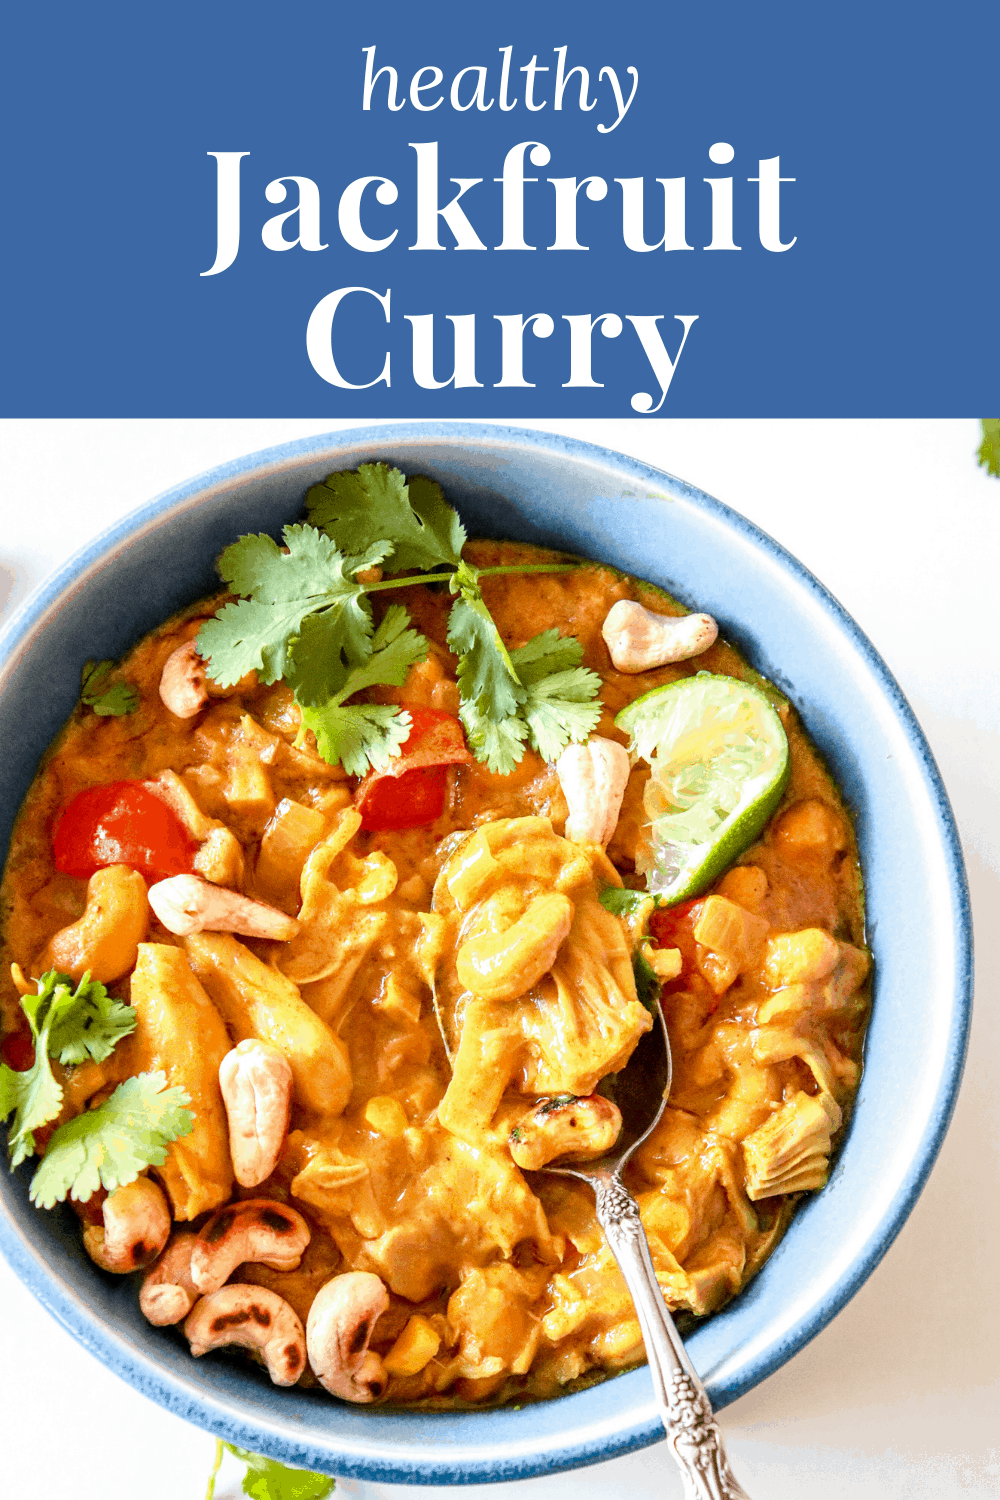 Rich & Creamy Vegan Jackfruit Curry (in 35 min!) - The Toasted Pine Nut